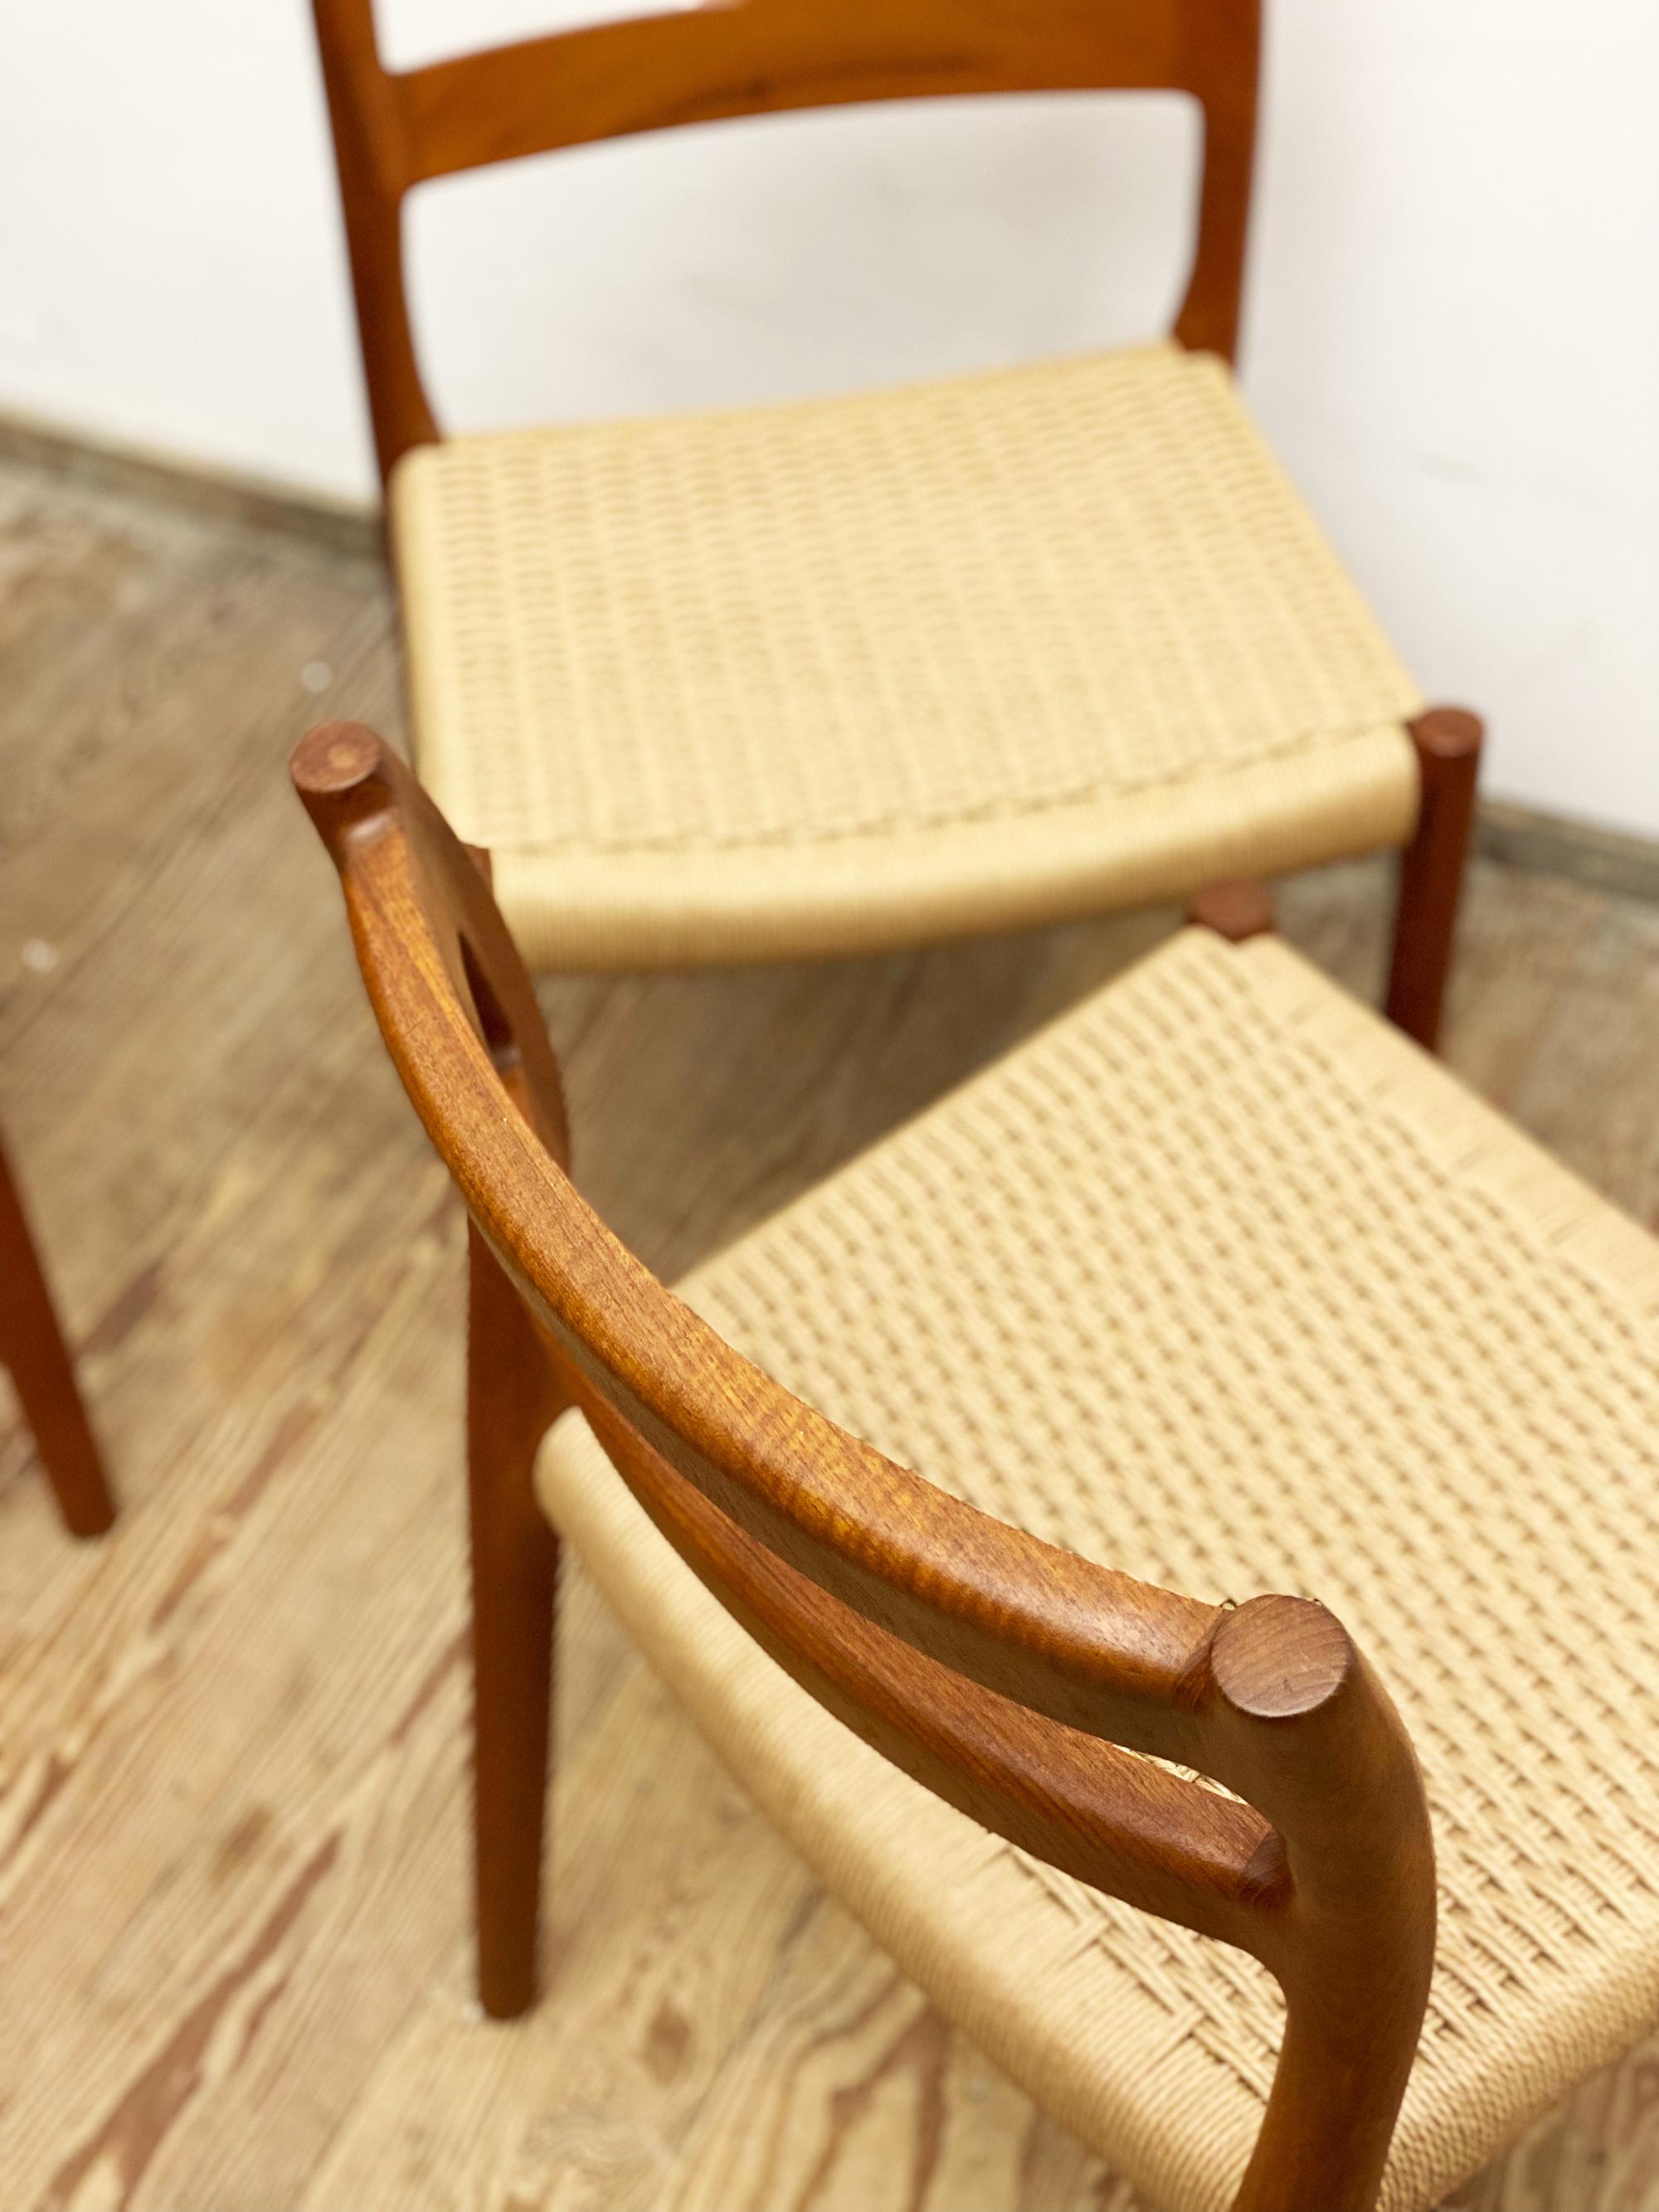 Papercord 6 Mid-Century Modern Teak Dining Chairs #84 by Niels O. Møller for J. L. Moller